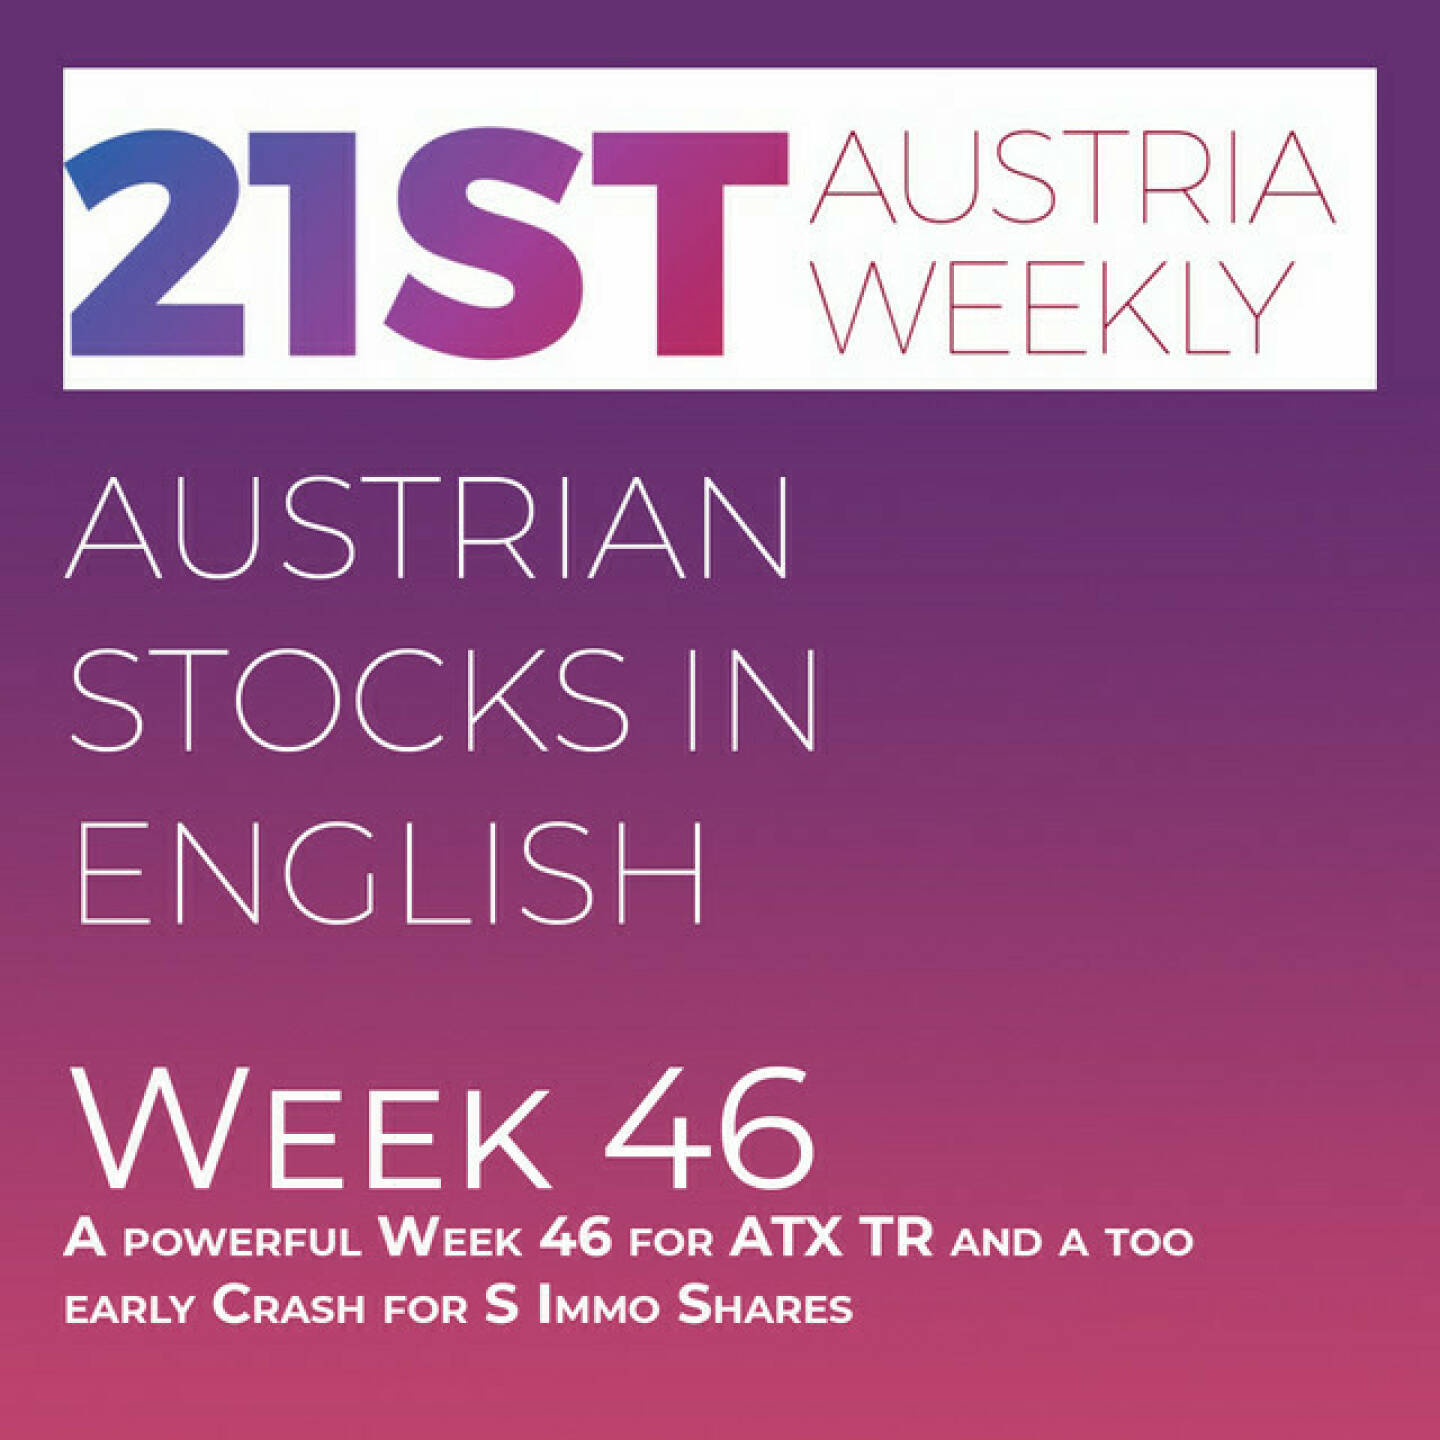 https://open.spotify.com/episode/3E6LYXJfckO8WzoHG97B55
Austrian Stocks in English: A powerful Week 46 for ATX TR and a too early Crash for S Immo Shares - Welcome to &#34;Austrian Stocks in English - presented by Palfinger&#34;, the new and weekly english spoken Summary for the Austrian Stock Market, positioned every Sunday in the mostly german languaged Podcast &#34; Christian Drastil - Wiener Börse, Sport Musik und Mehr“ . <br/>Week 46 was again a good week for ATX TR which gained 0,68 percent and closed above 6800. The best stock was Marinomed.<br/>The 20 percent fall of S Immo shares started long before the additional acceptance period for the CPI Property offer ended. The end was defined by the Austrian Takeover Commission at Friday 5 pm. <br/>News came from Wienerberger, Kapch TrafficCom (2), Rosenbauer, Vienna Insurance Group, Strabag, Semperit, DO &amp; CO, Vienna Airport, Uniqa and Frauenthal Group and are spoken by Allison.<br/>Please rate my Podcast on Apple Podcasts (or Spotify): https://podcasts.apple.com/at/podcast/christian-drastil-wiener-borse-sport-musik-und-mehr-my-life/id1484919130 .